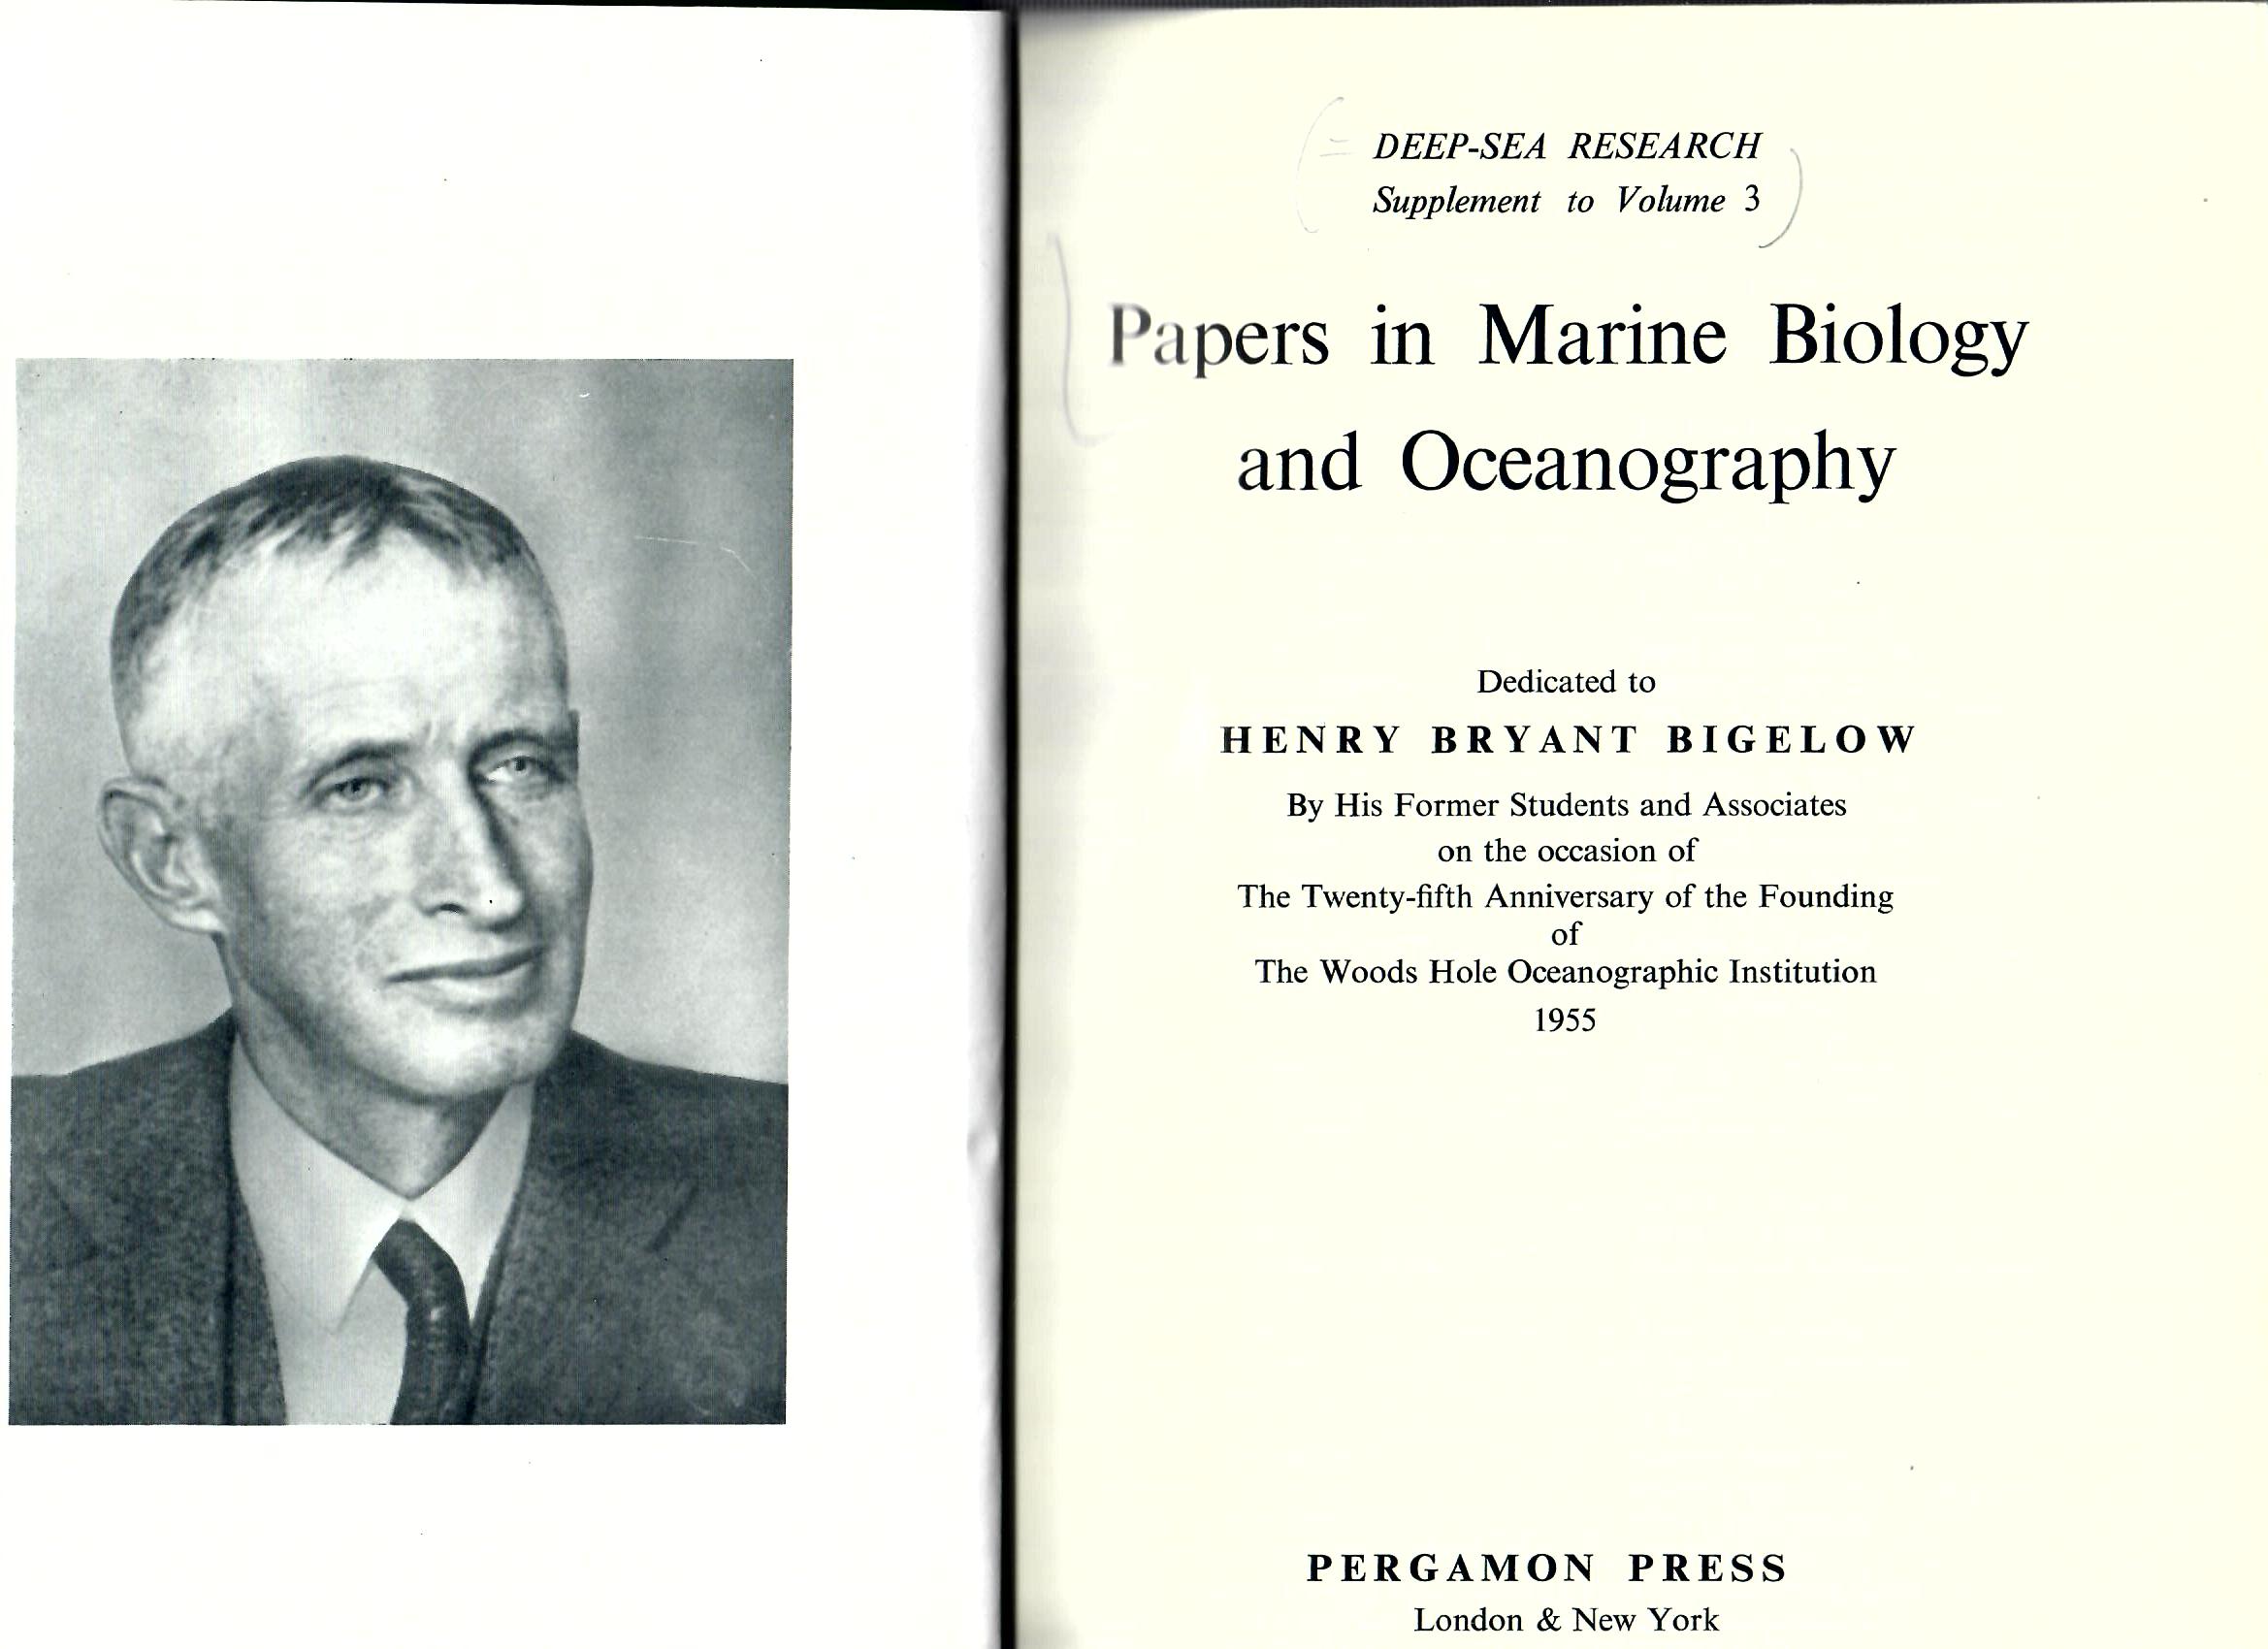 Bigelow, Henry Bryant   : Papers in Marine Biology and Oceanography : deep-sea research supplement to volume 3, Dedicated to Henry Bryant Bigelow by his former students and associates on the occasion of the twenty-fifth anniversary of the founding of the woods hole oceanographic institution 1955